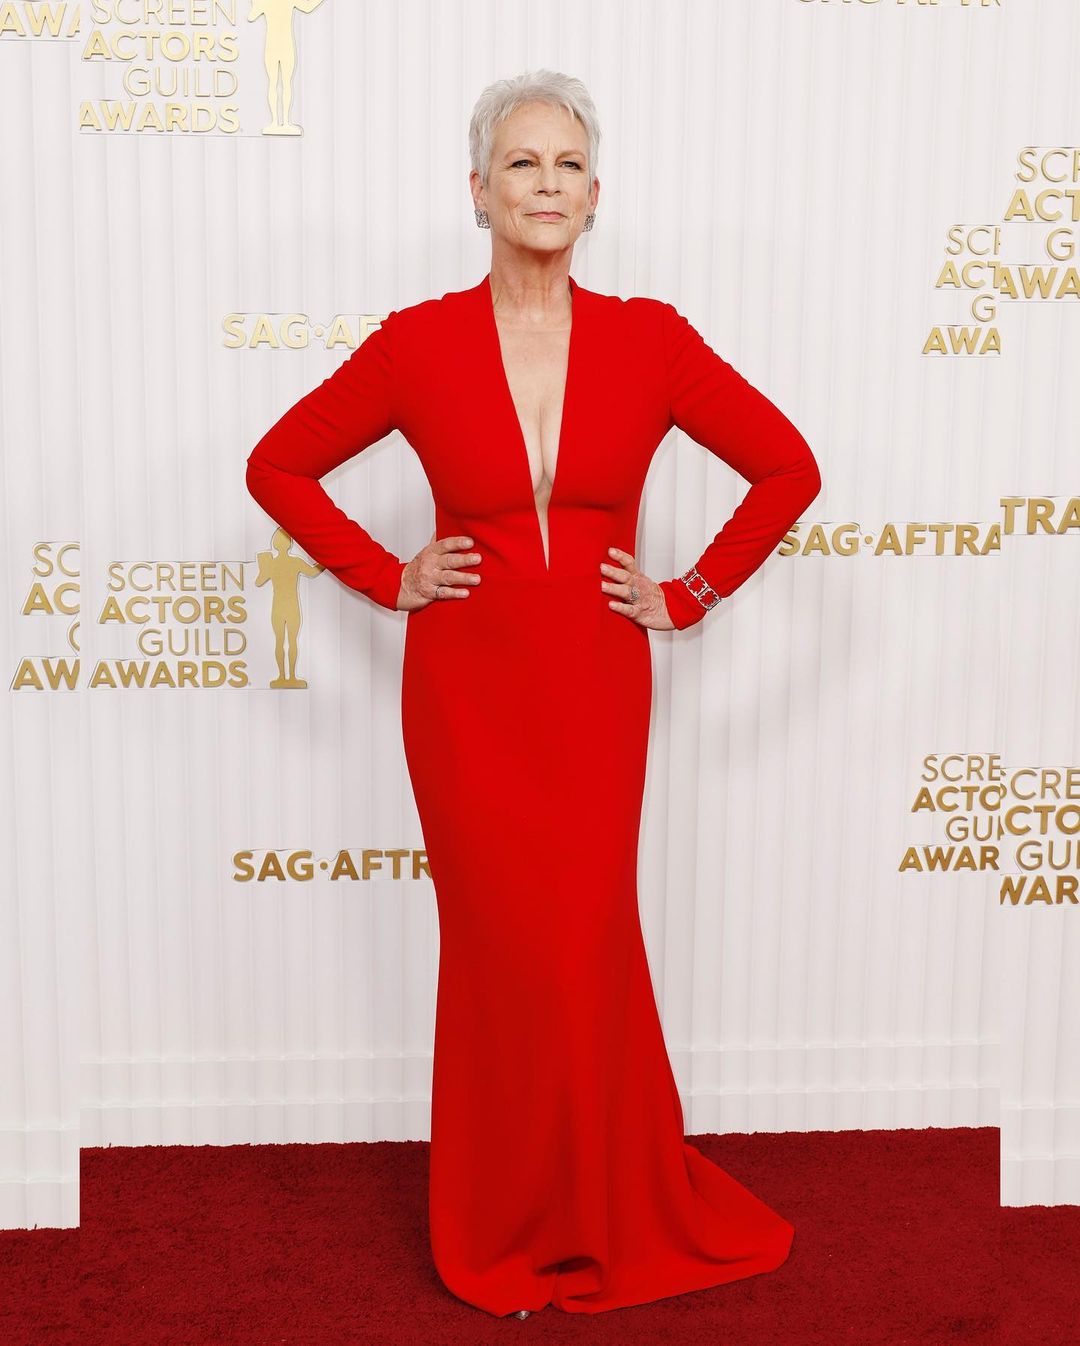 Jamie Lee Curtis looked ravishing in a red gown by Romona Keveza.